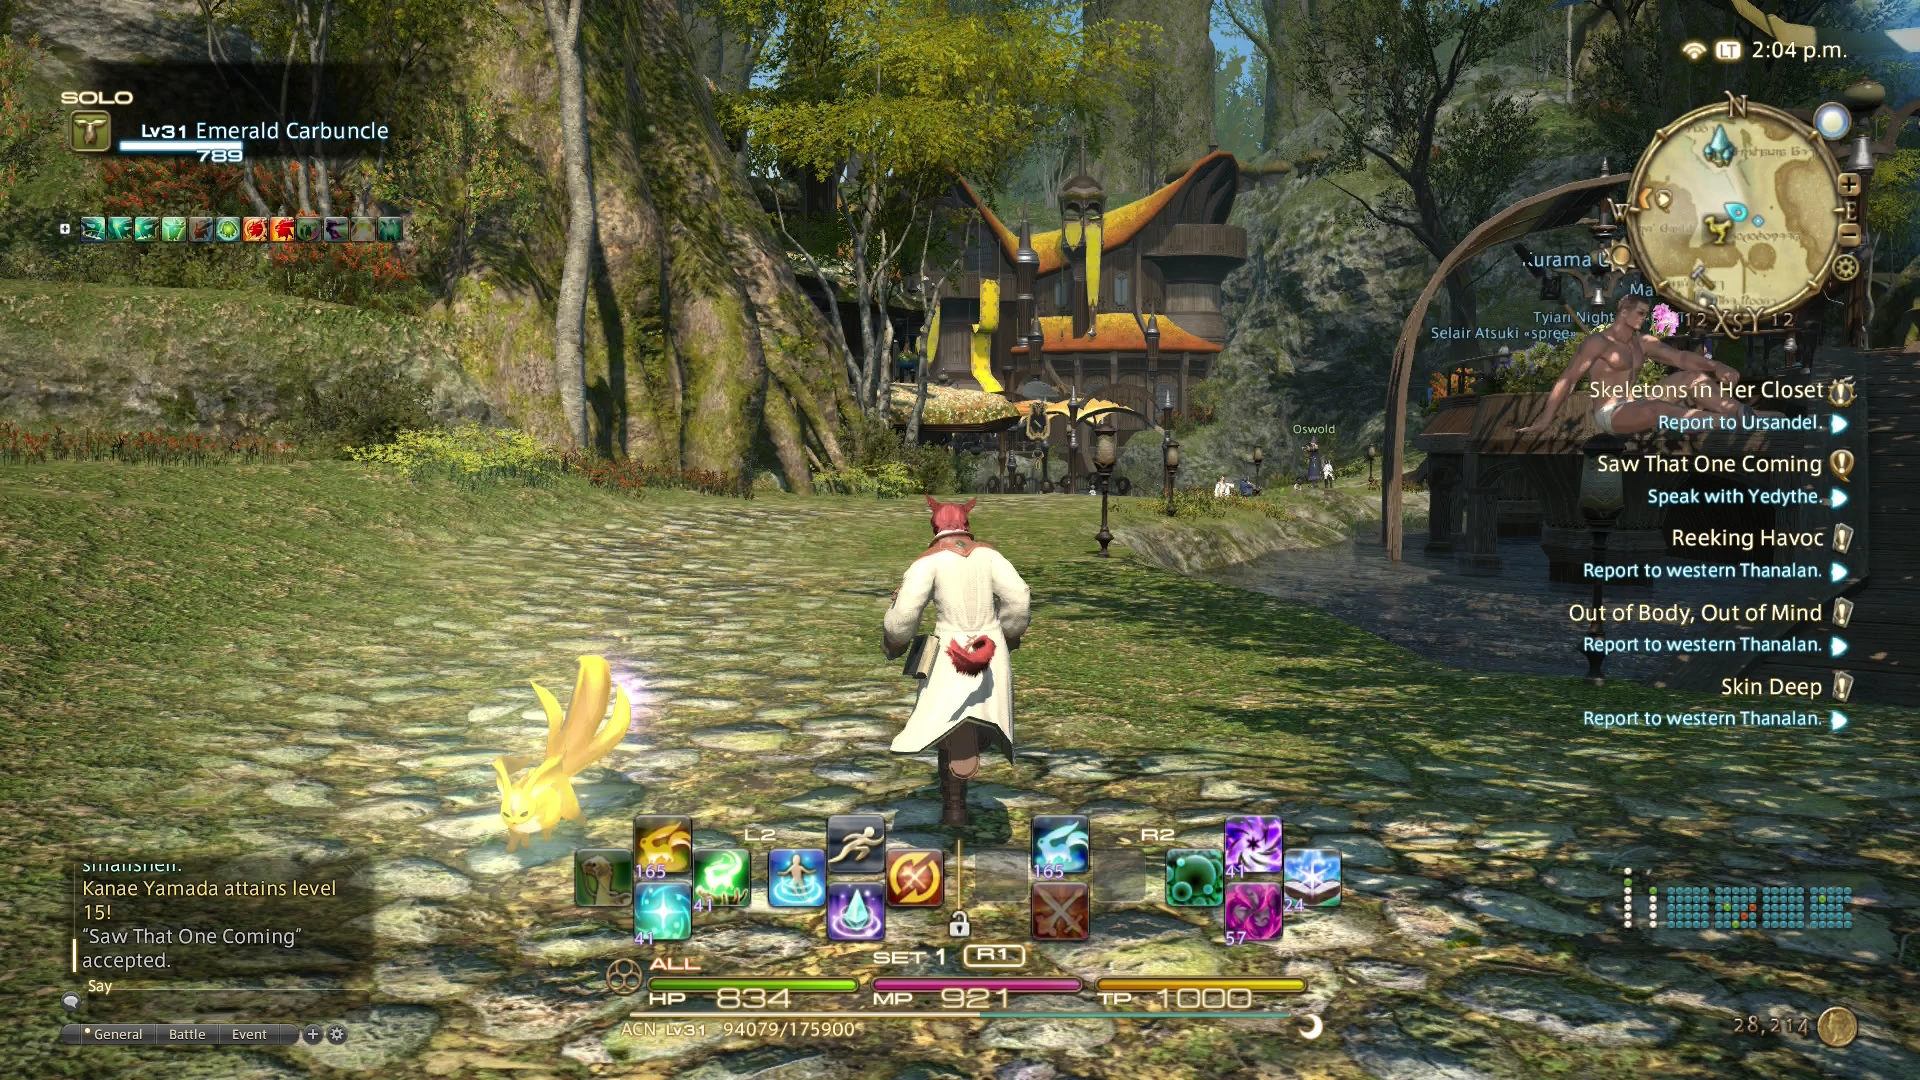 Final Fantasy 14 Up For RPG And Online Game Of The Year At This